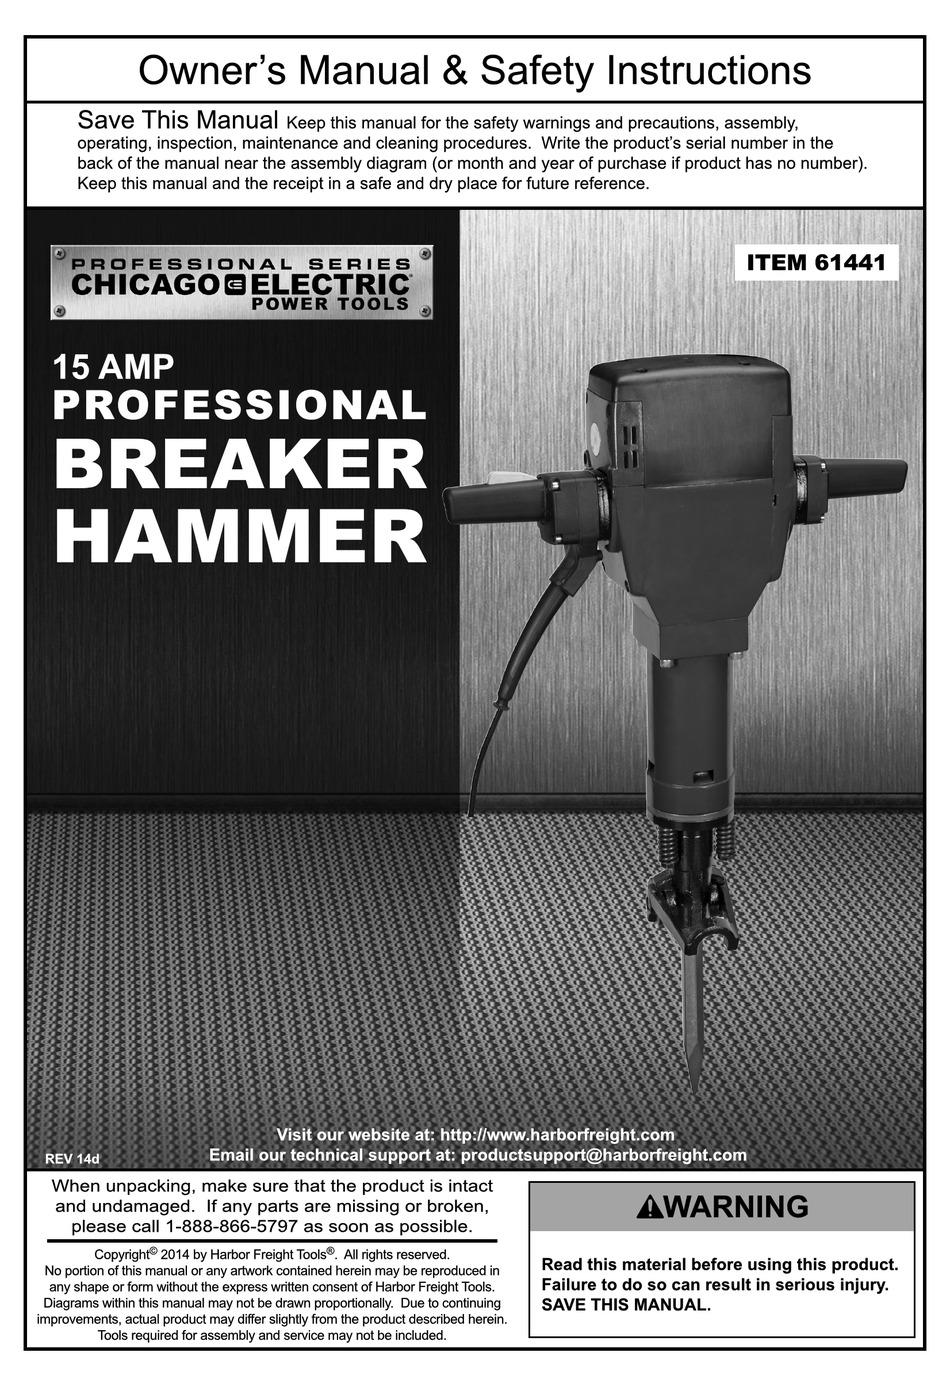 CHICAGO ELECTRIC 61441 OWNER'S MANUAL & SAFETY INSTRUCTIONS Pdf